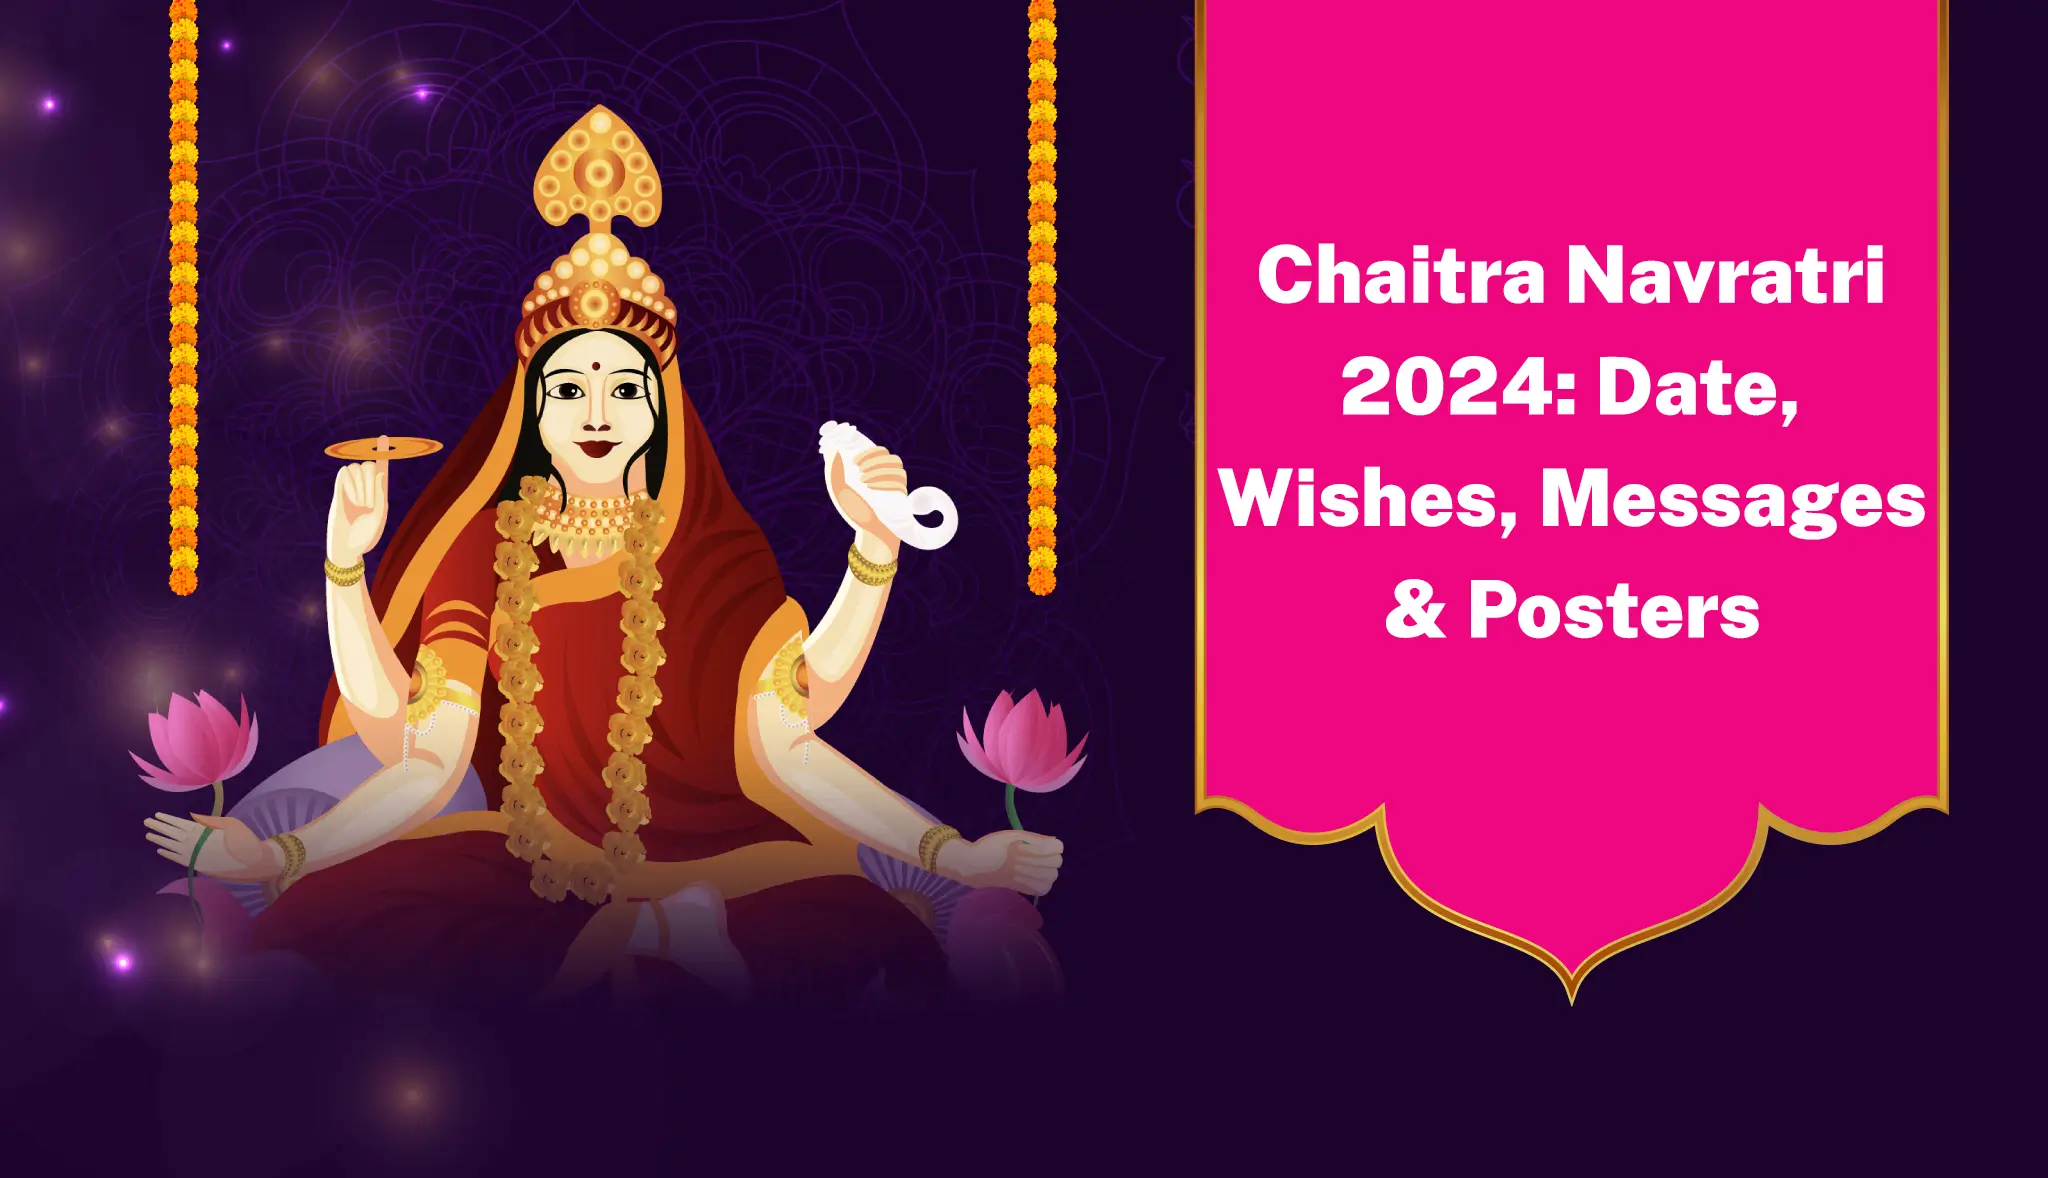 Chaitra Navratri 2024: Date, Wishes, Messages & Posters - Postive